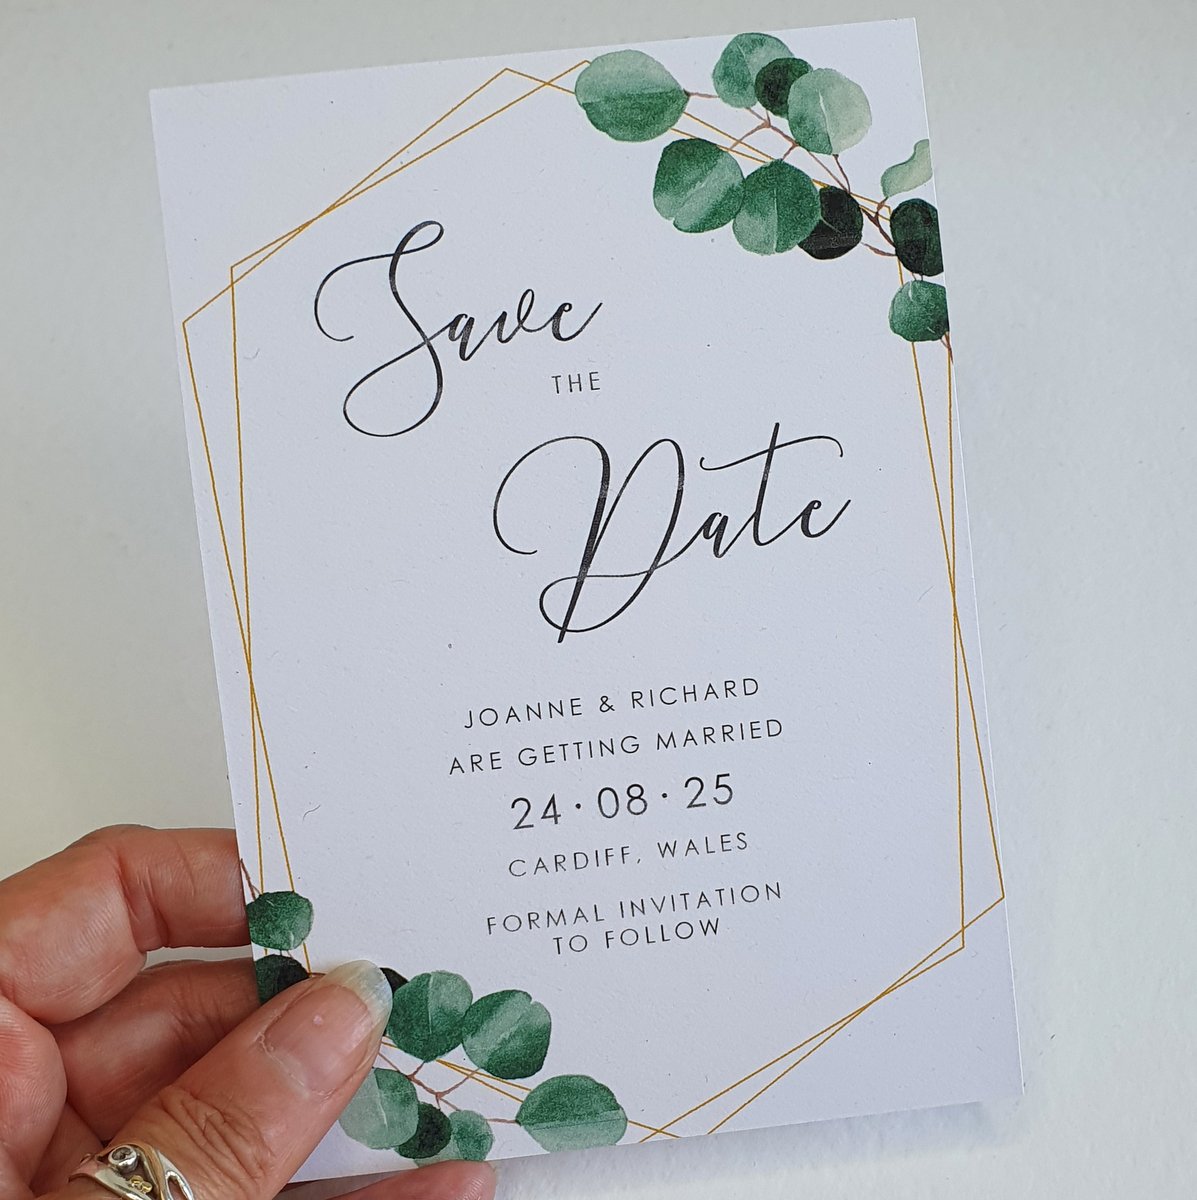 Wedding invitations and save the date: 9 mistakes to avoid